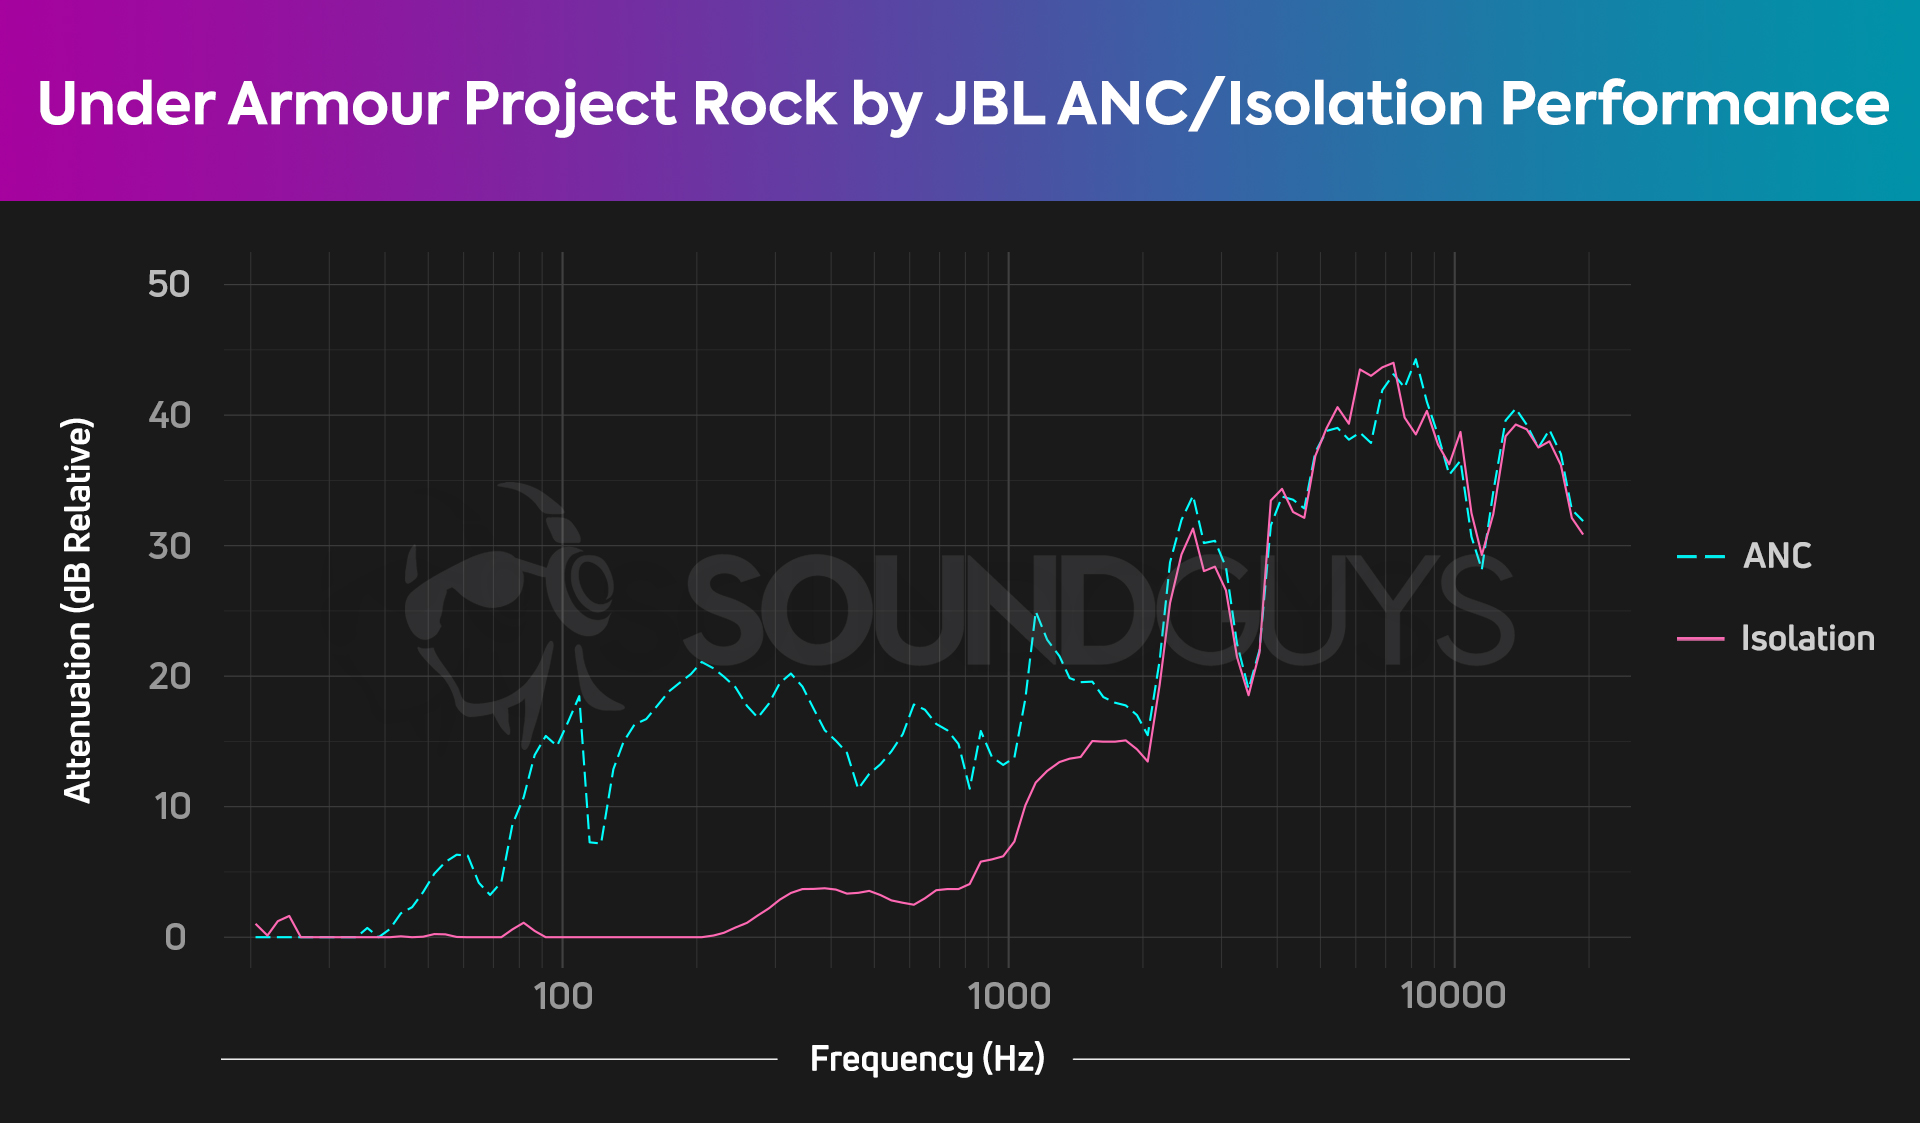 SoundGuys ANC and isolation chart shows up to 45dB of isolation around 8kHz and good ANC in lows and mids with the Under Armour Project Rock by JBL headphones. 